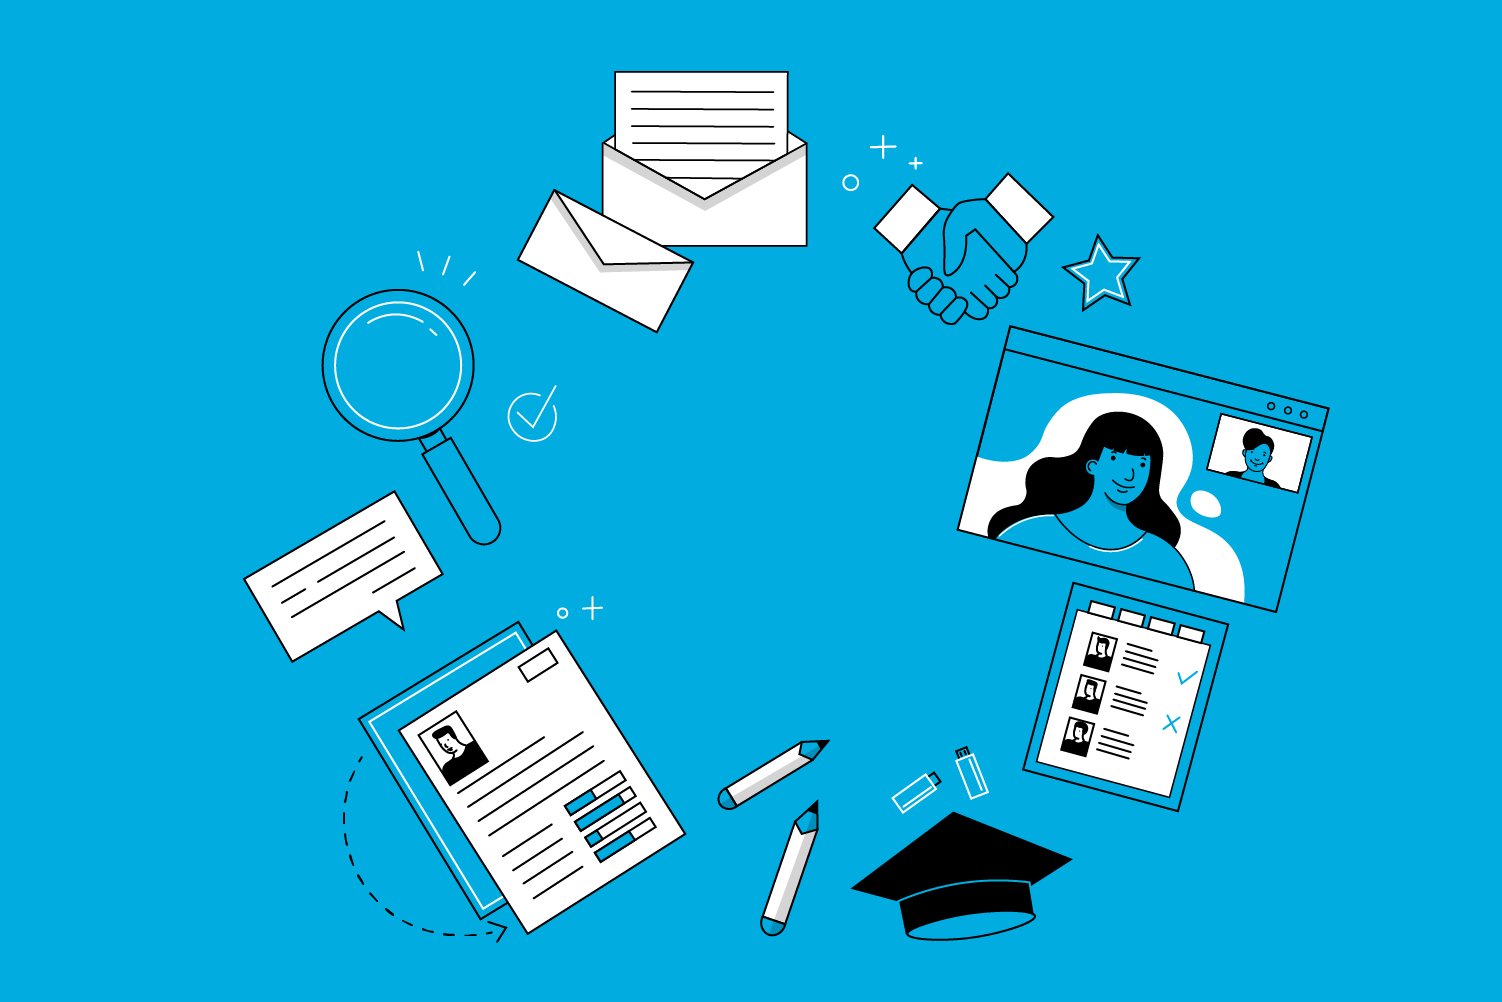 Illustrations of a handshake, an academic cap, an envelope, and other stationery 